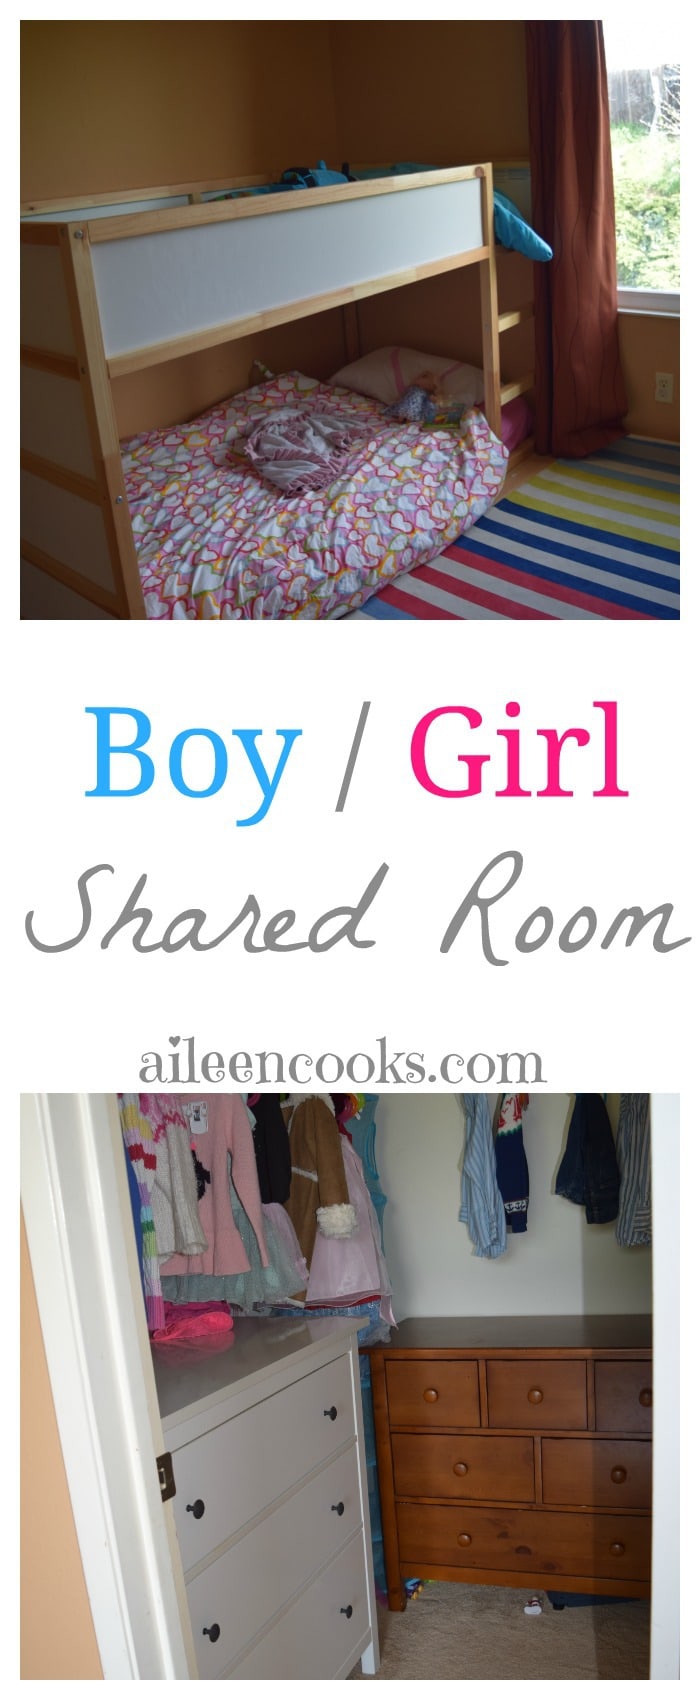 A peek inside our boy and girl shared room. Post from aileencooks.com.